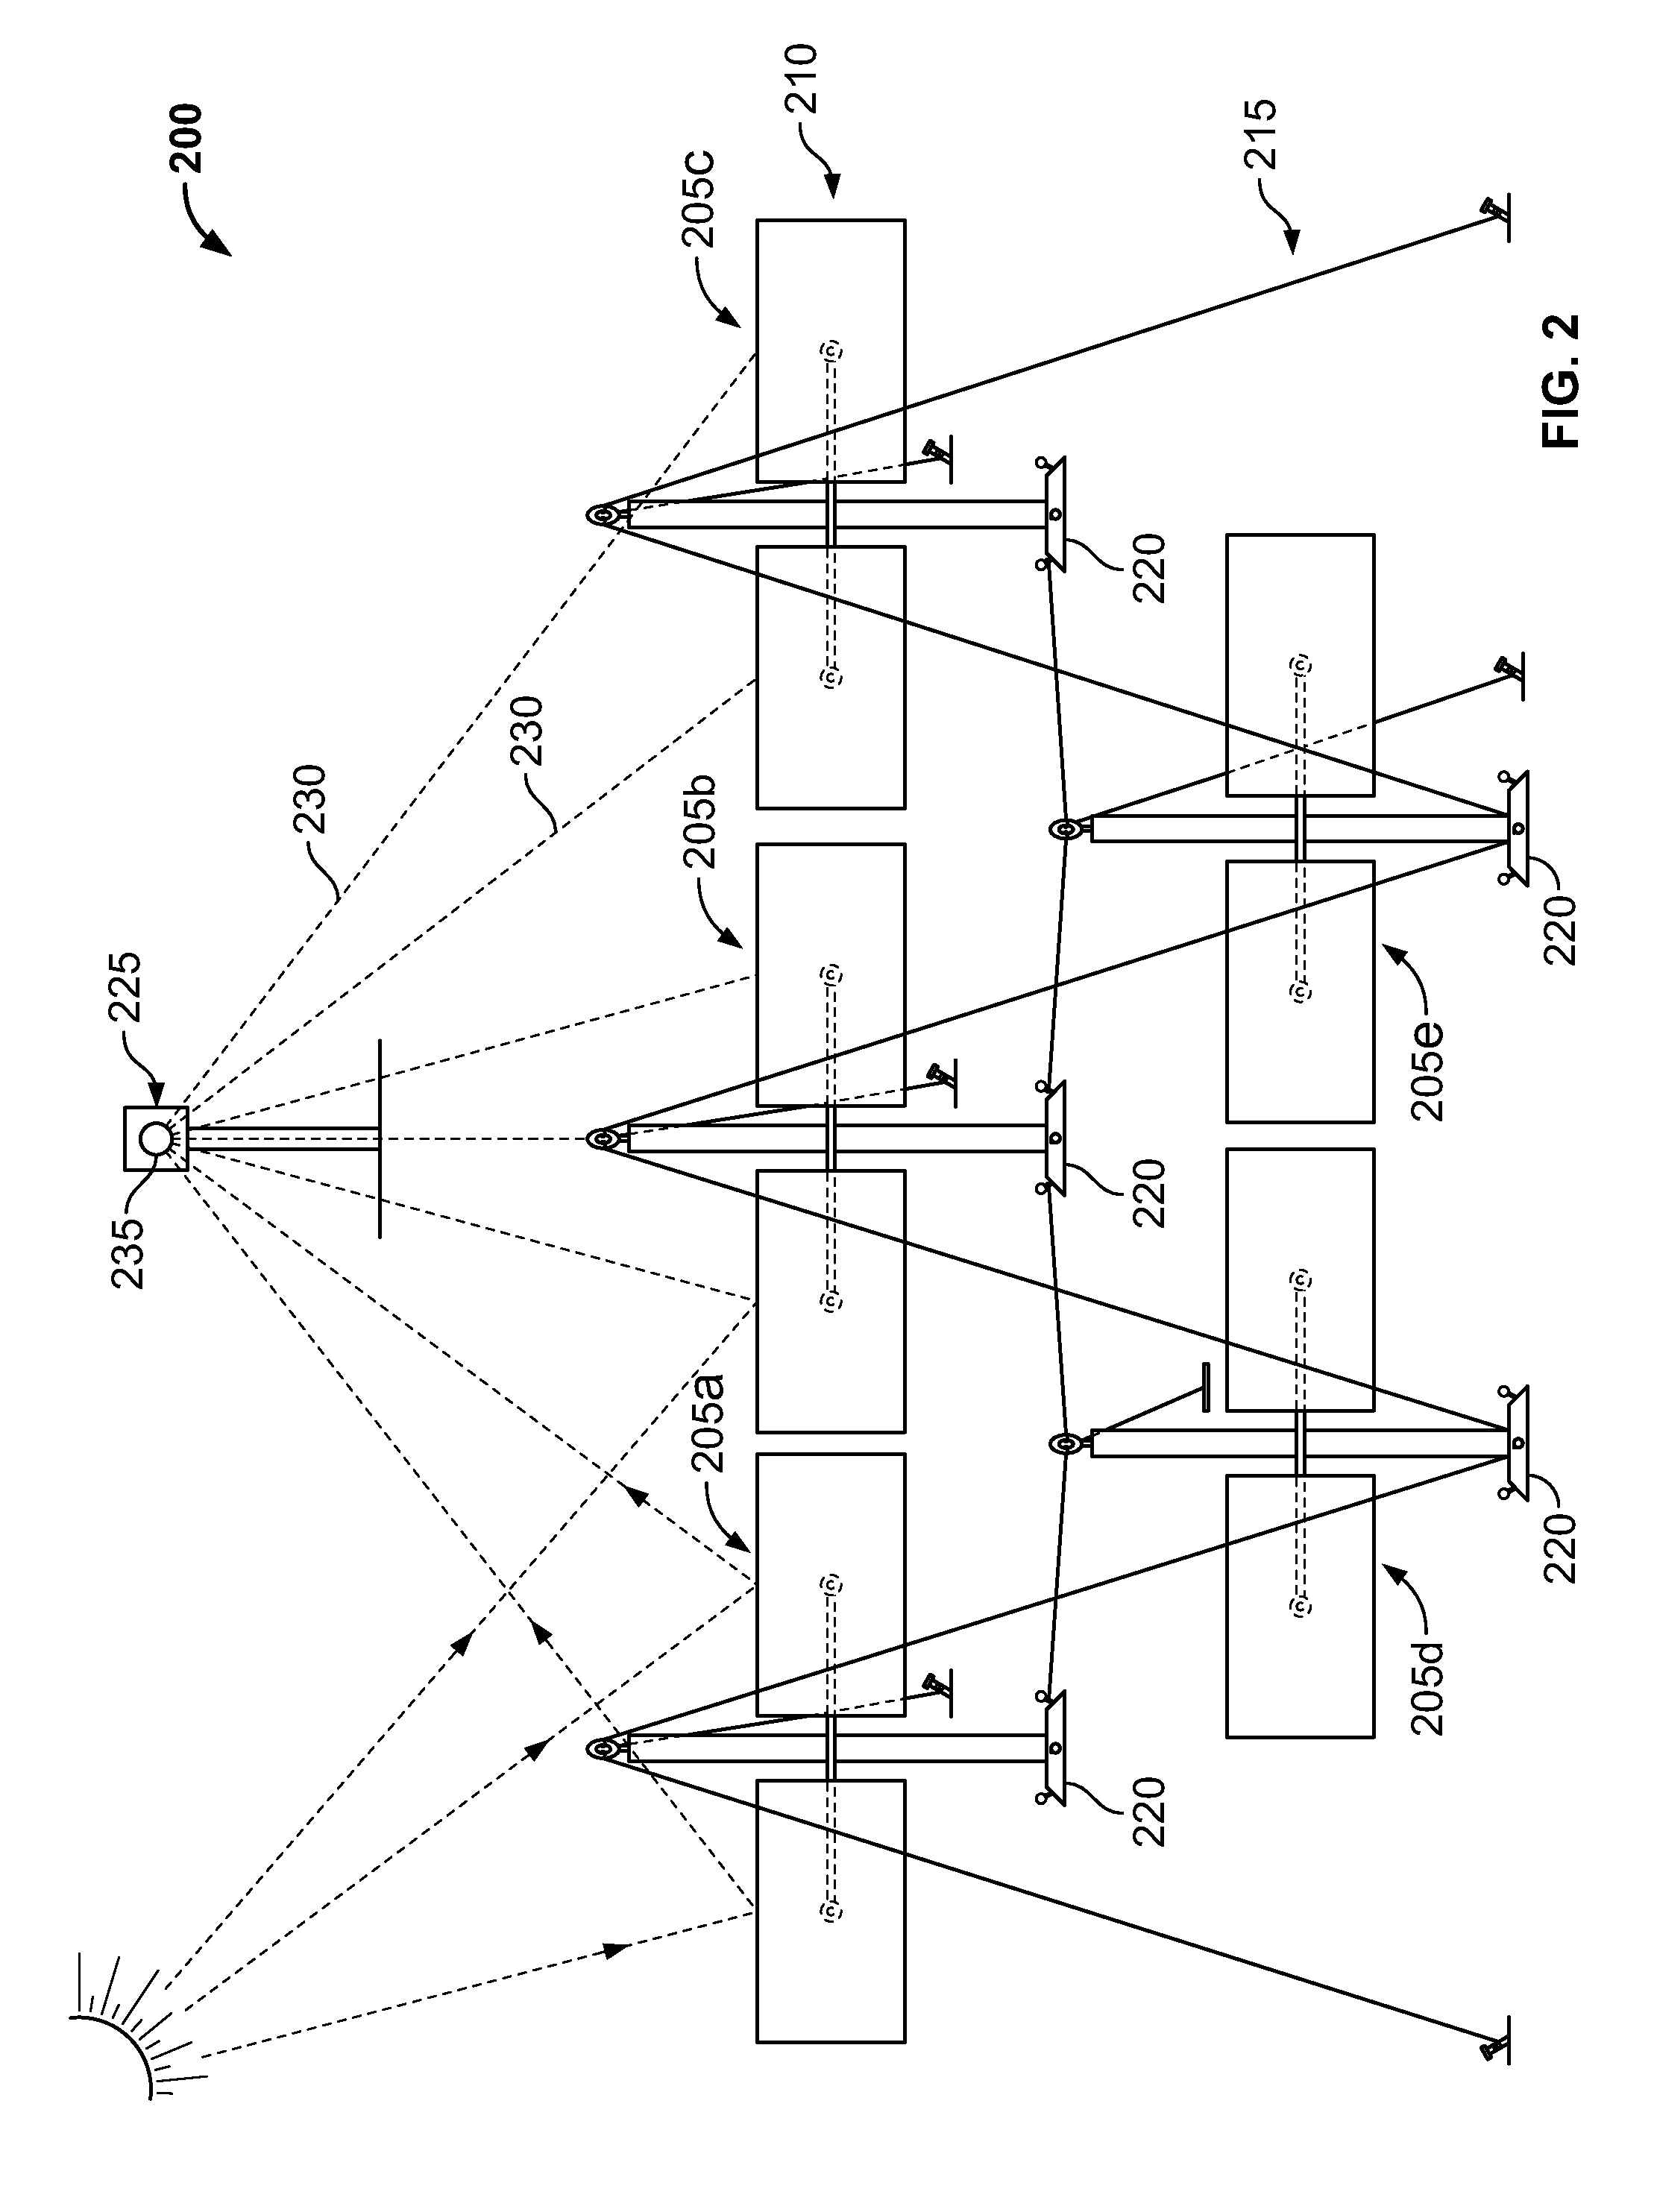 Systems and Methods for Solar Energy Management